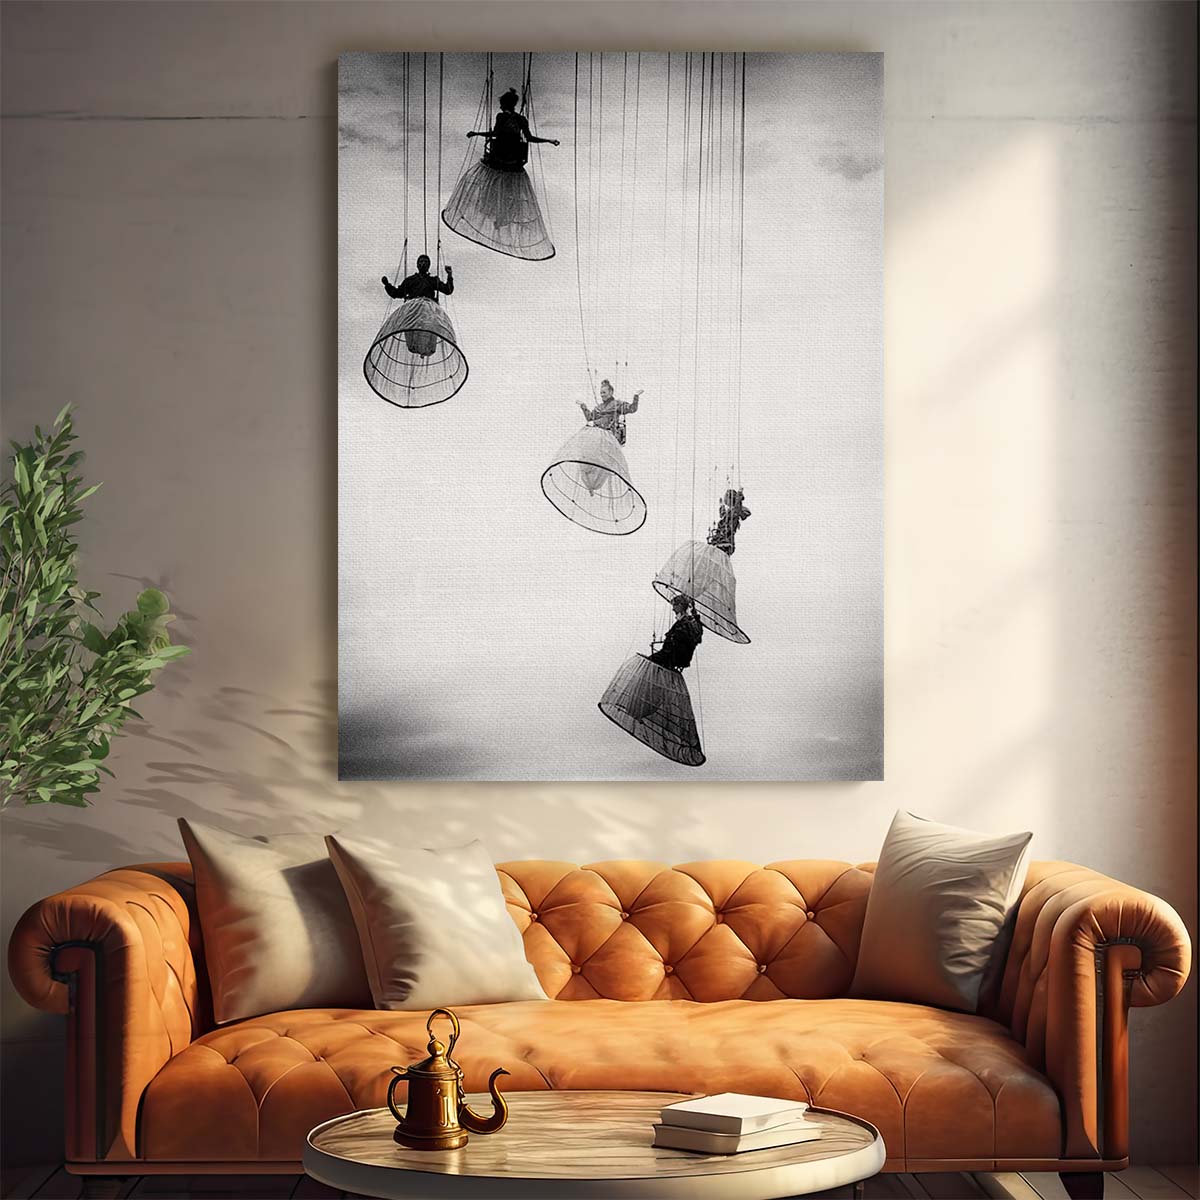 Romanian Summer Theatre Festival BW Vintage Angels Photography Wall Art by Luxuriance Designs, made in USA